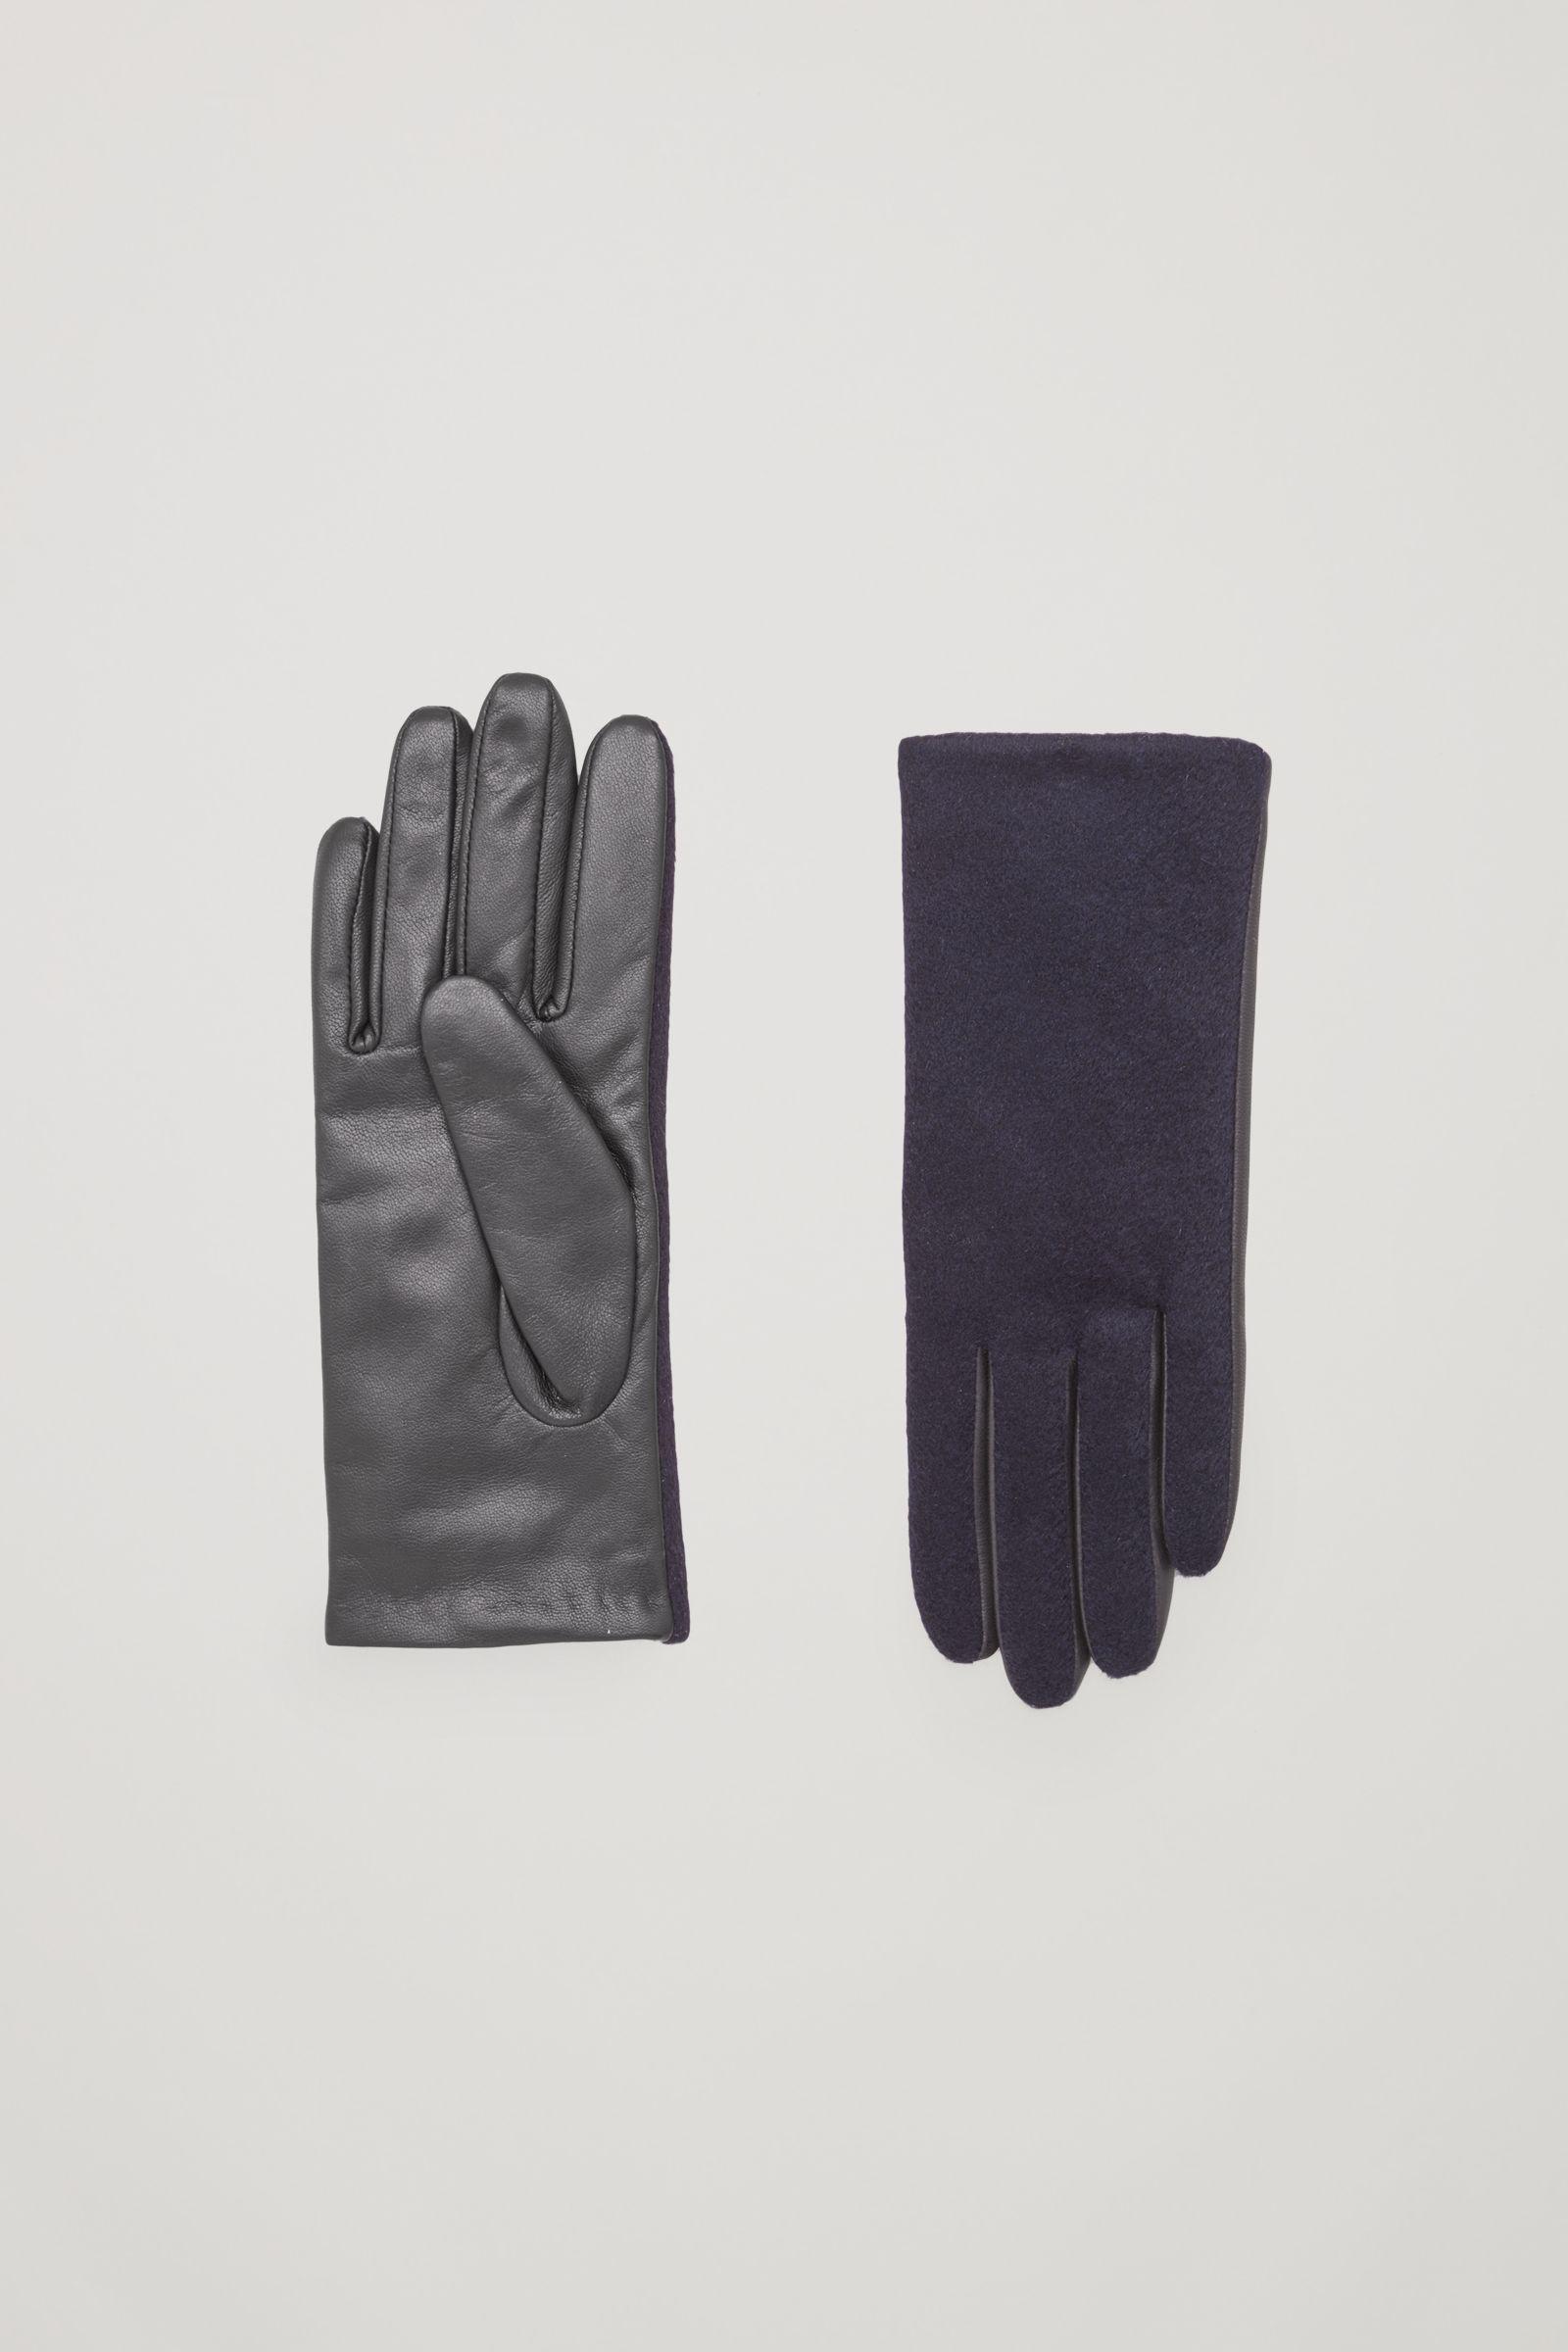 Cos Leather And Wool Gloves - Images Gloves and Descriptions ...